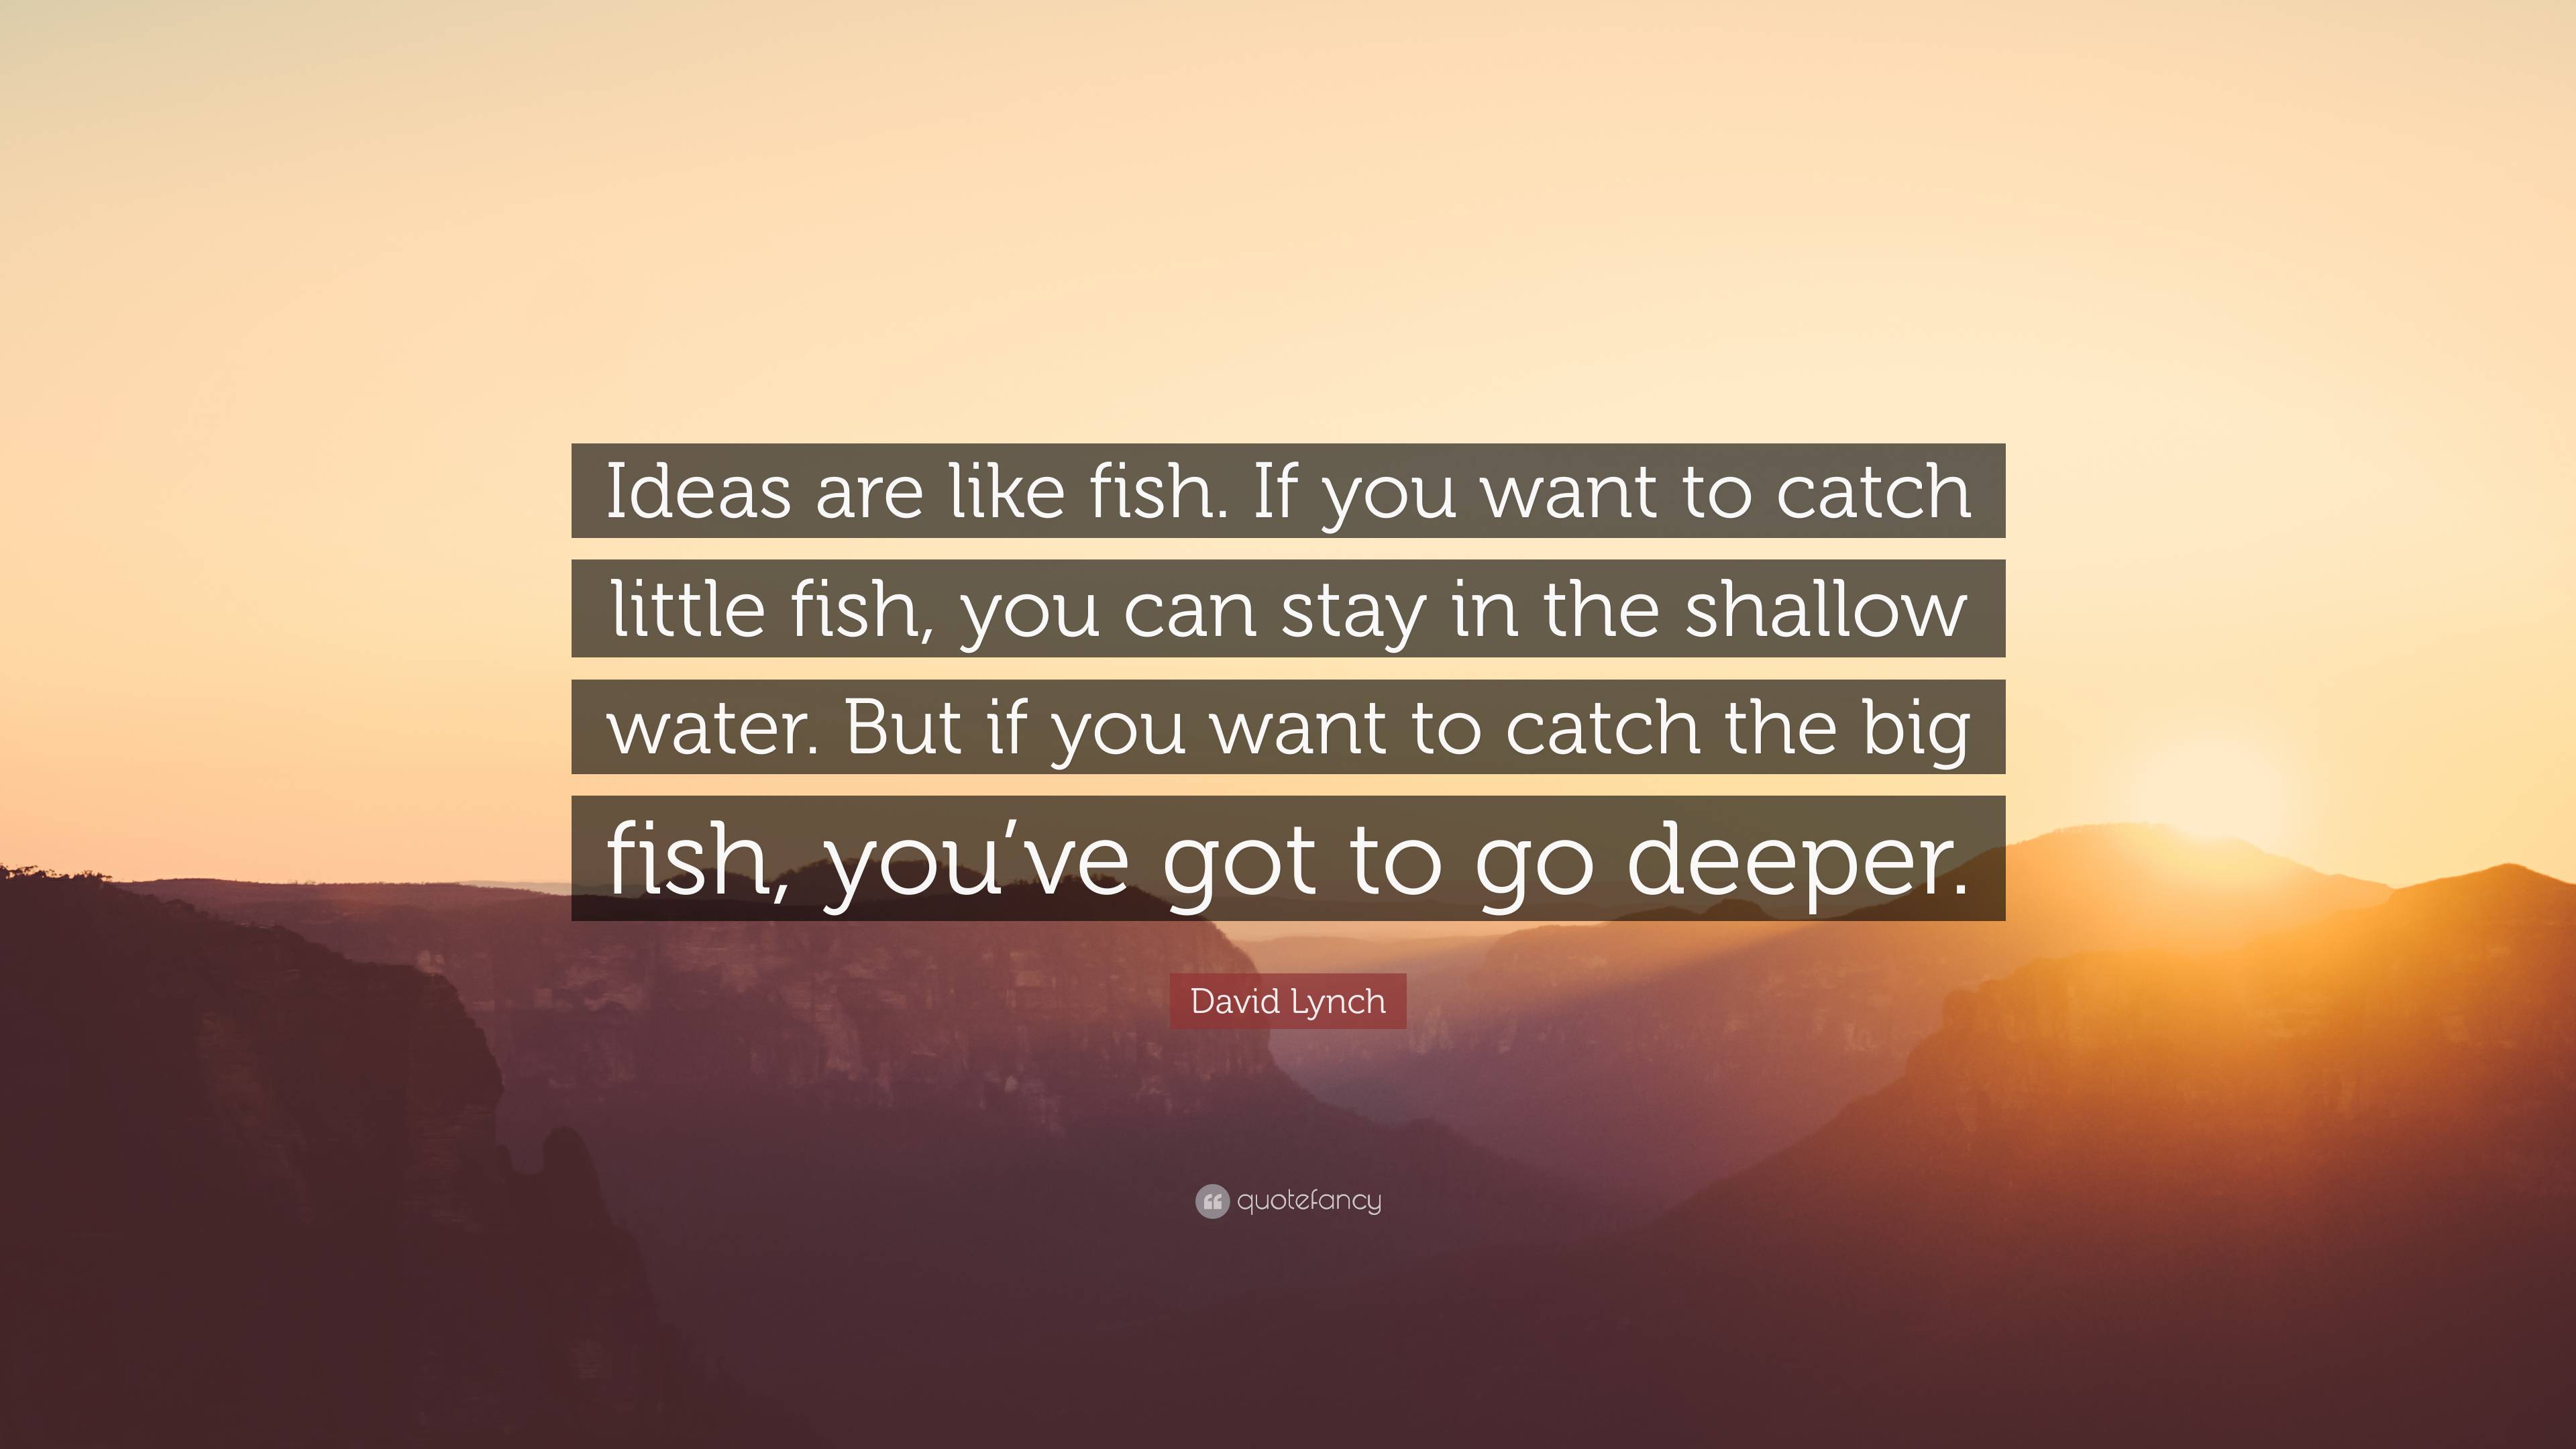 David Lynch Quote: “Ideas are like fish. If you want to catch